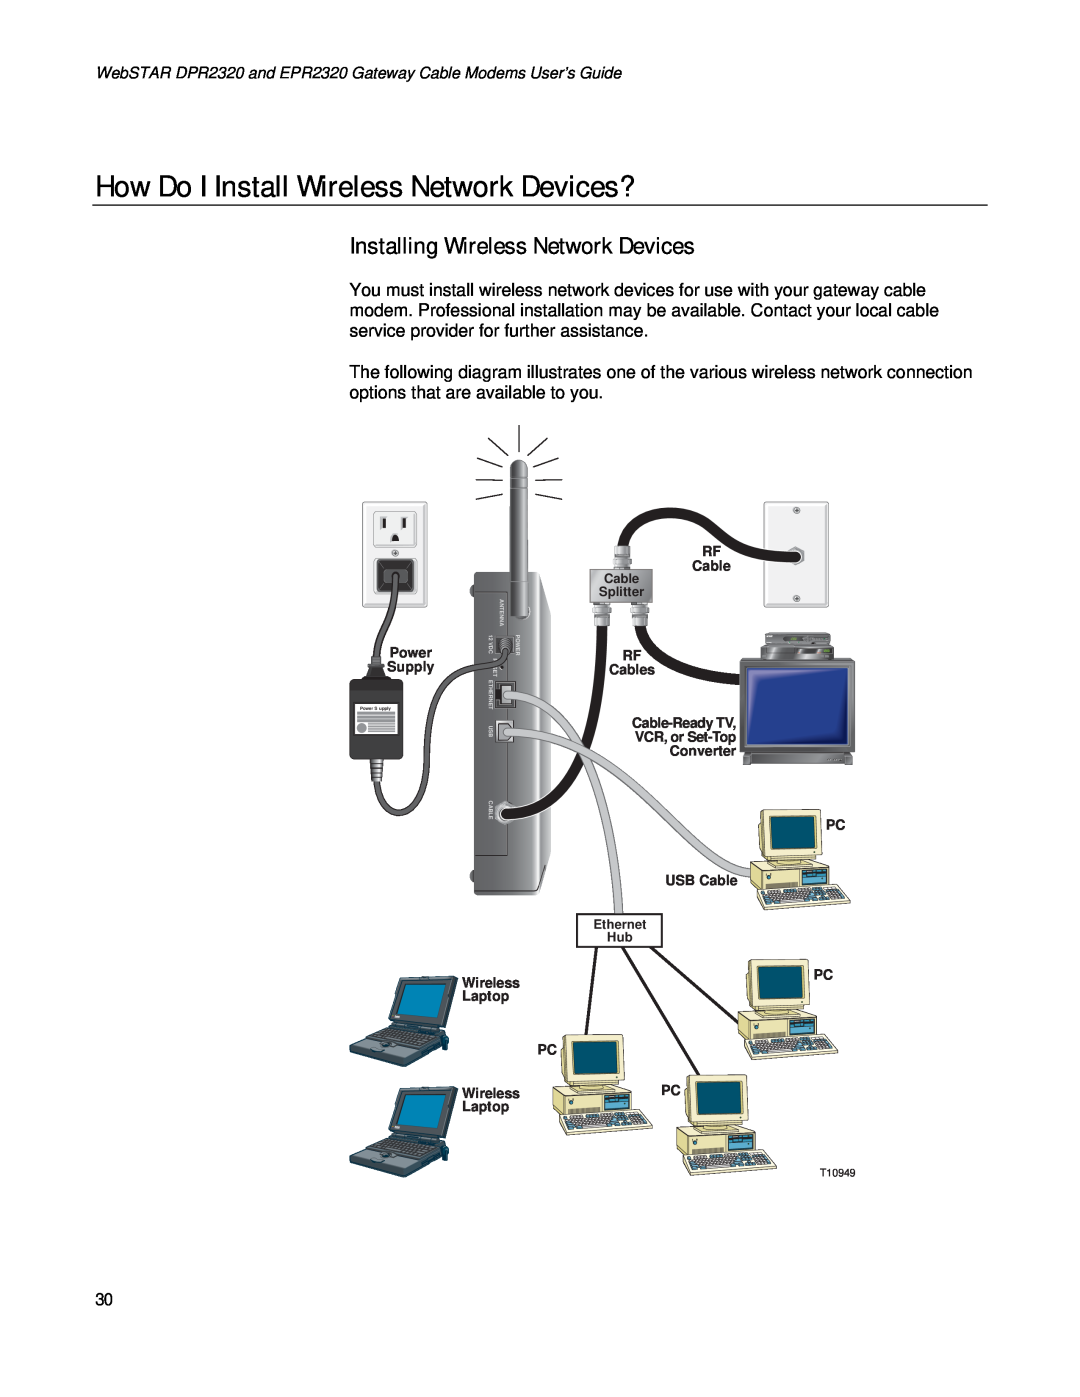 Apple DPR2320TM, EPR2320TM manual How Do I Install Wireless Network Devices?, Installing Wireless Network Devices 